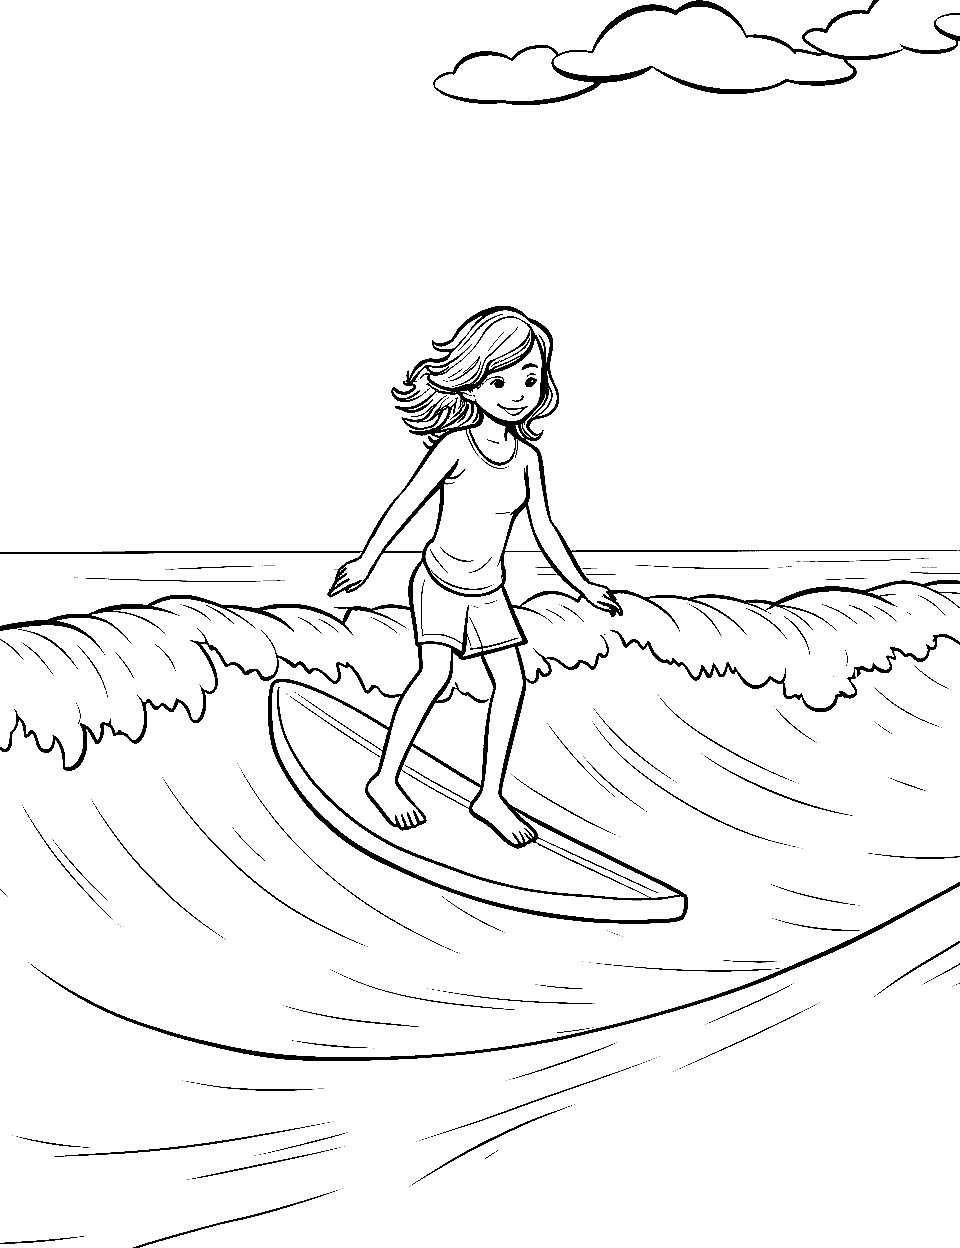 Surfing on Gentle Waves Coloring Page - A teenager surfing on easy, manageable waves with a clear sky.